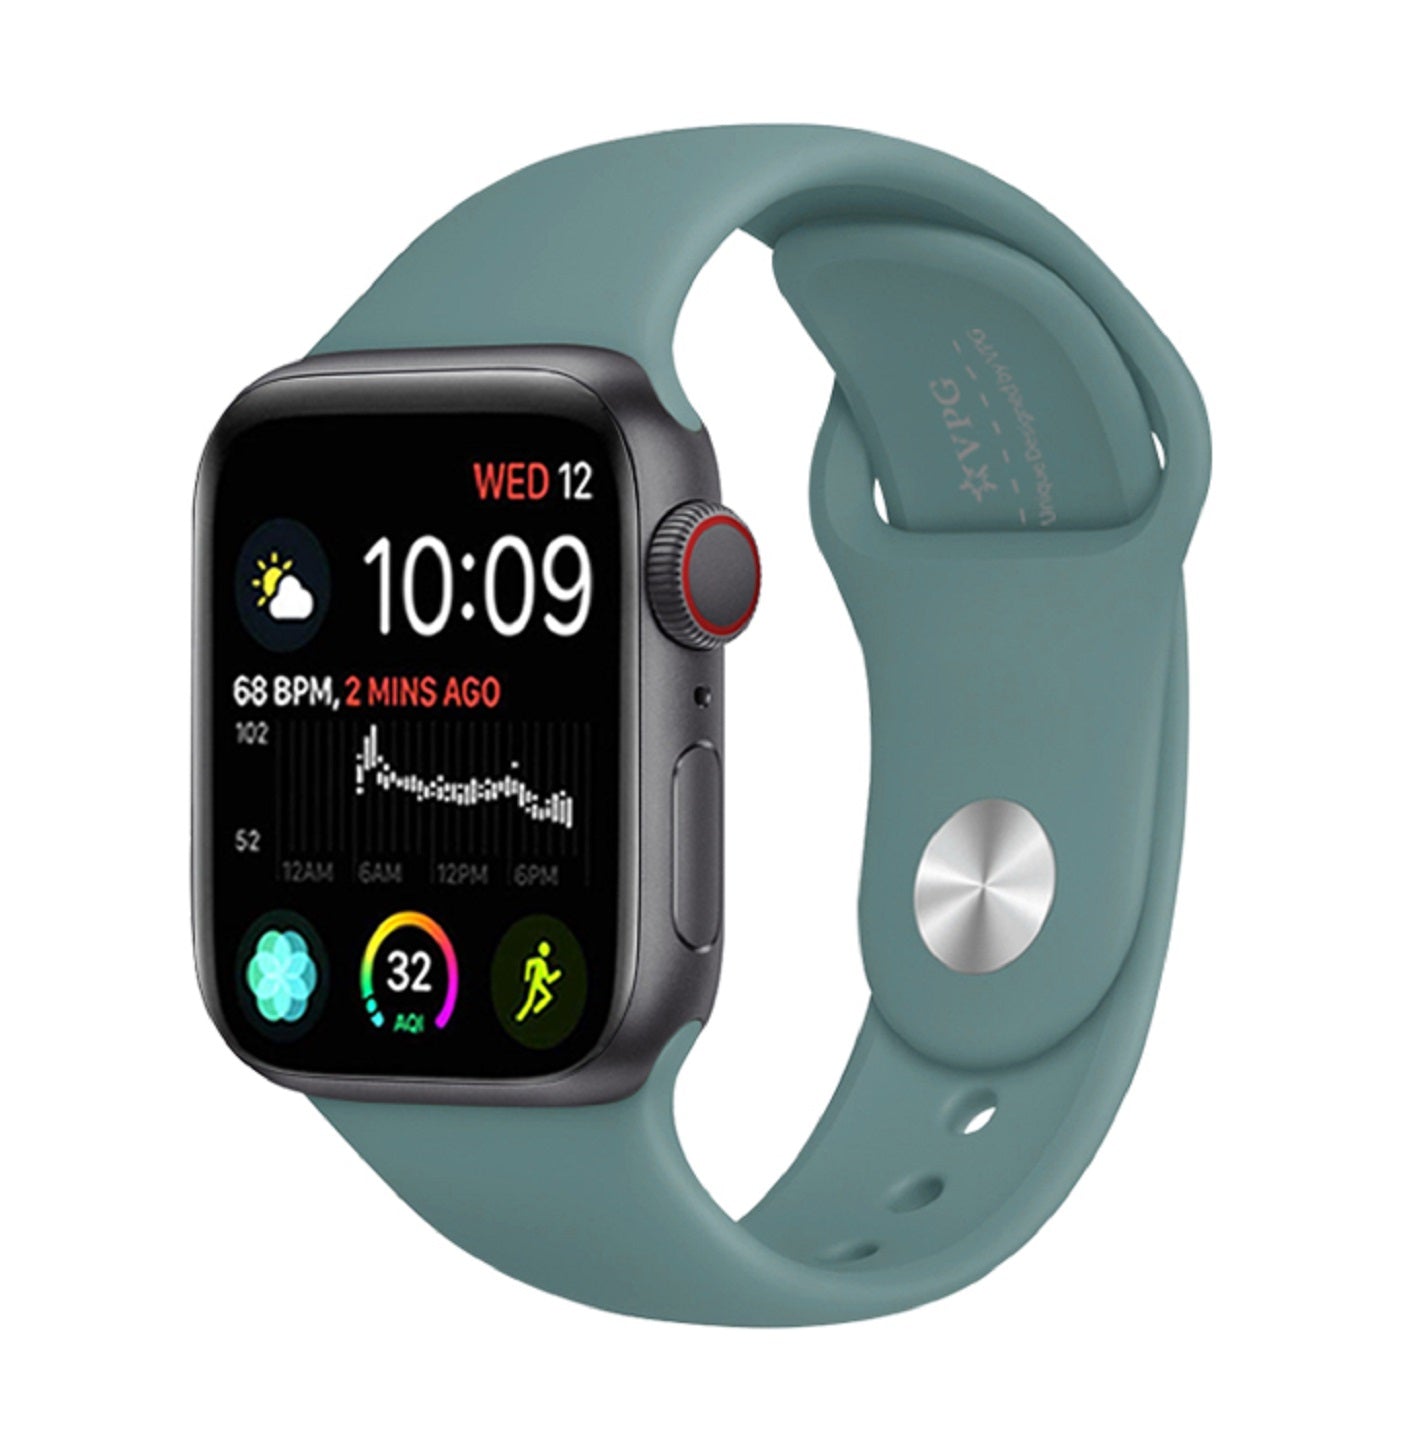 VPG Silicone Sport Band for Apple Watch 1/2/3/4/5/6/7/8/9/SE/Ultra/Ultra 2 Themis Series (3 Colors)